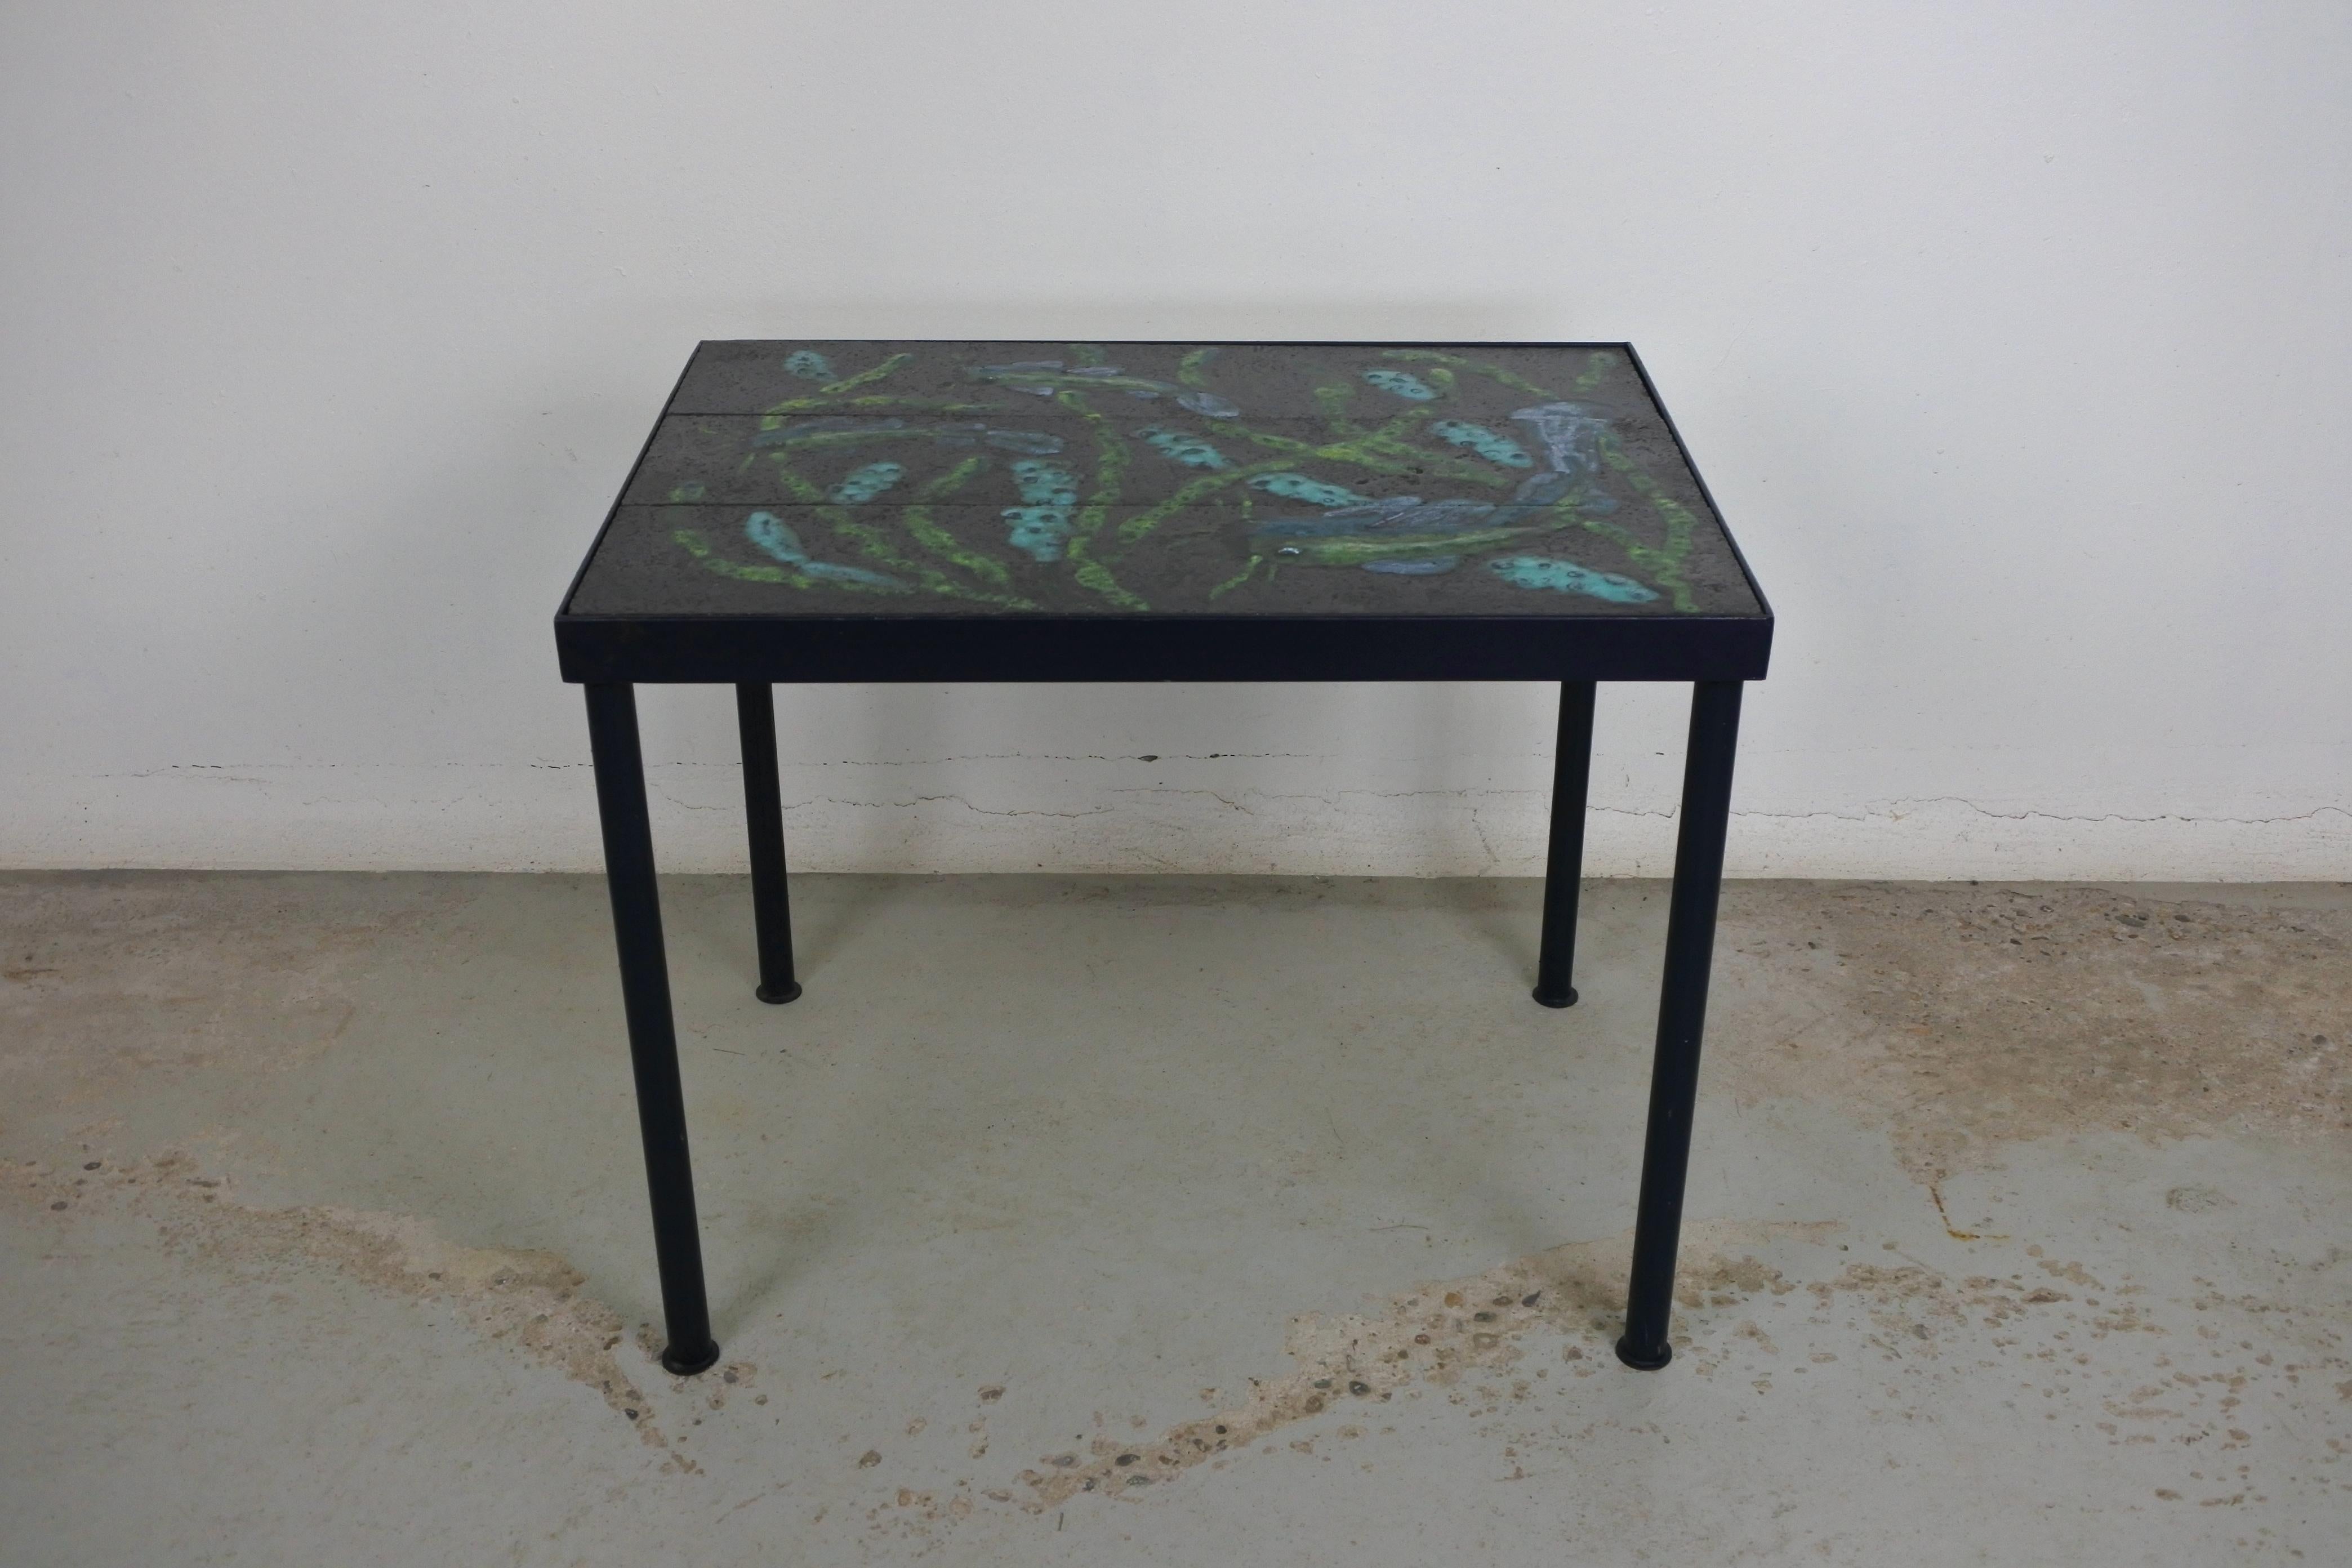 Mid-Century Modern side table.
Blue lacquered metal and enamelled ceramic tiles.
Made in France in the 1950s.

Japan inspired decor of Koï fish. Very decorative

Tables often attributed to Jacques Adnet and La Compagnie des Arts Francais, they